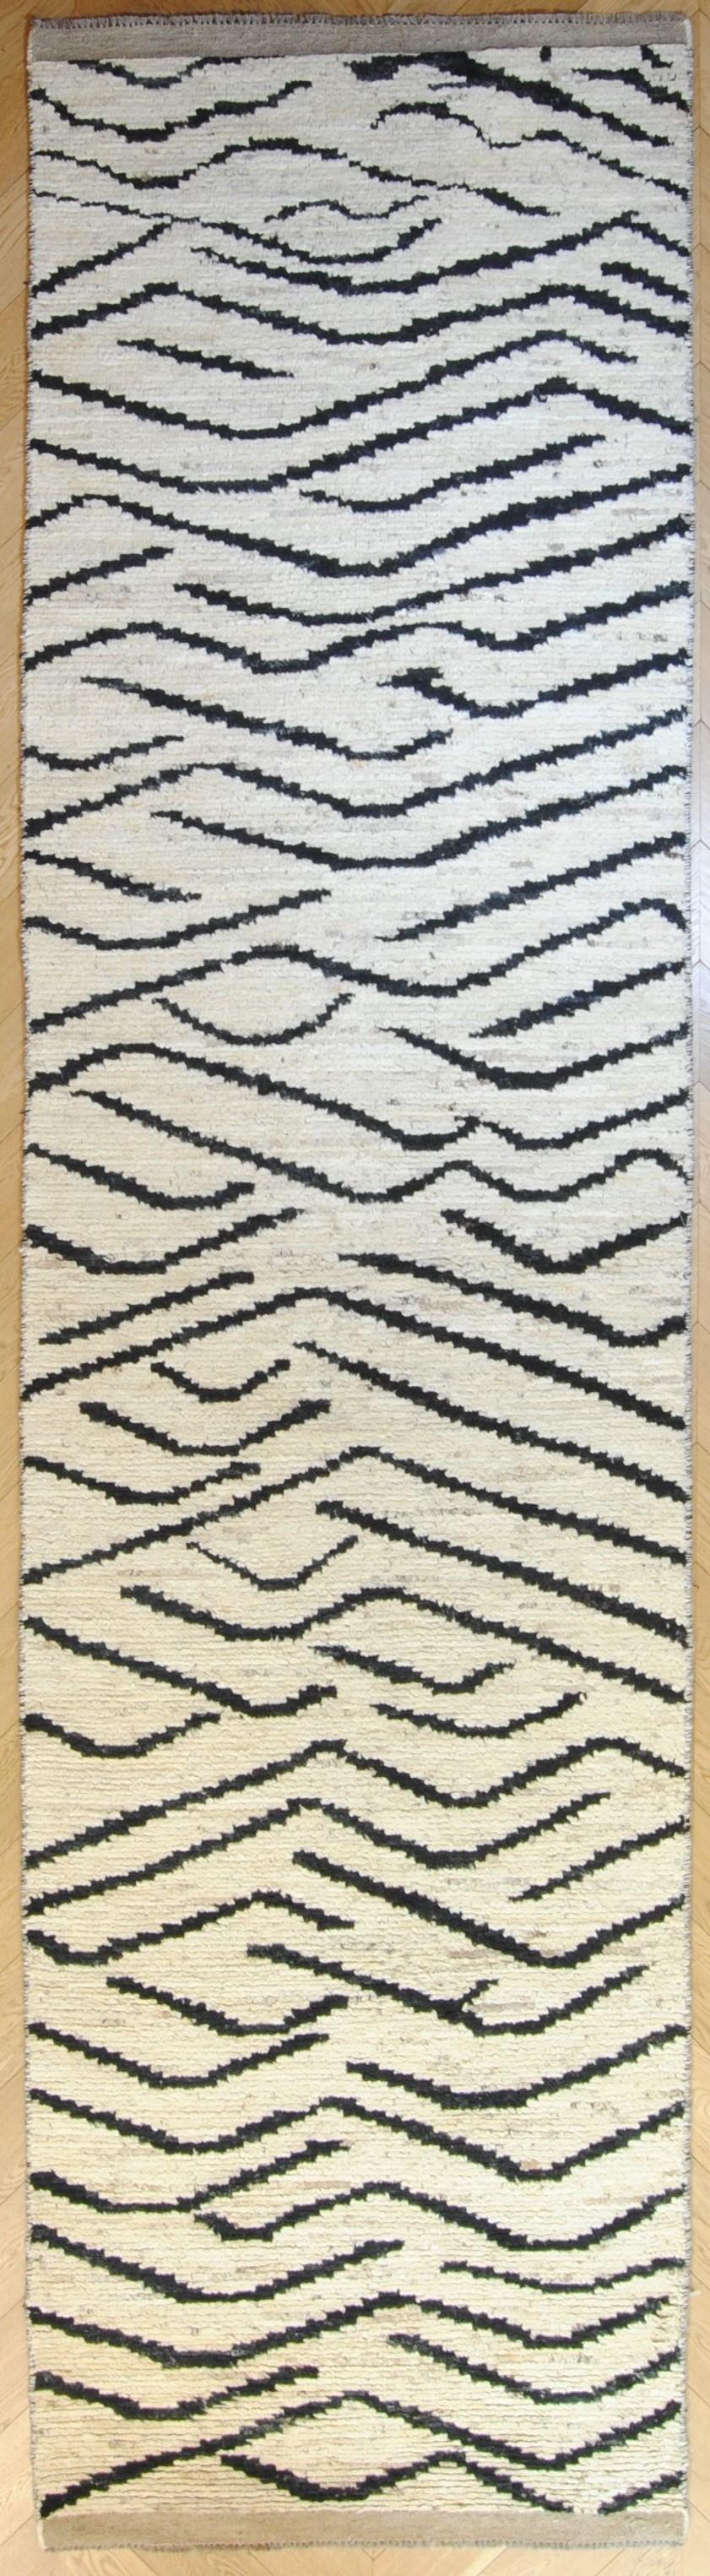 This Afghan rug is a work of contemporary art made with a technique of ancient weaving: the decoration draws inspiration from the so-called 